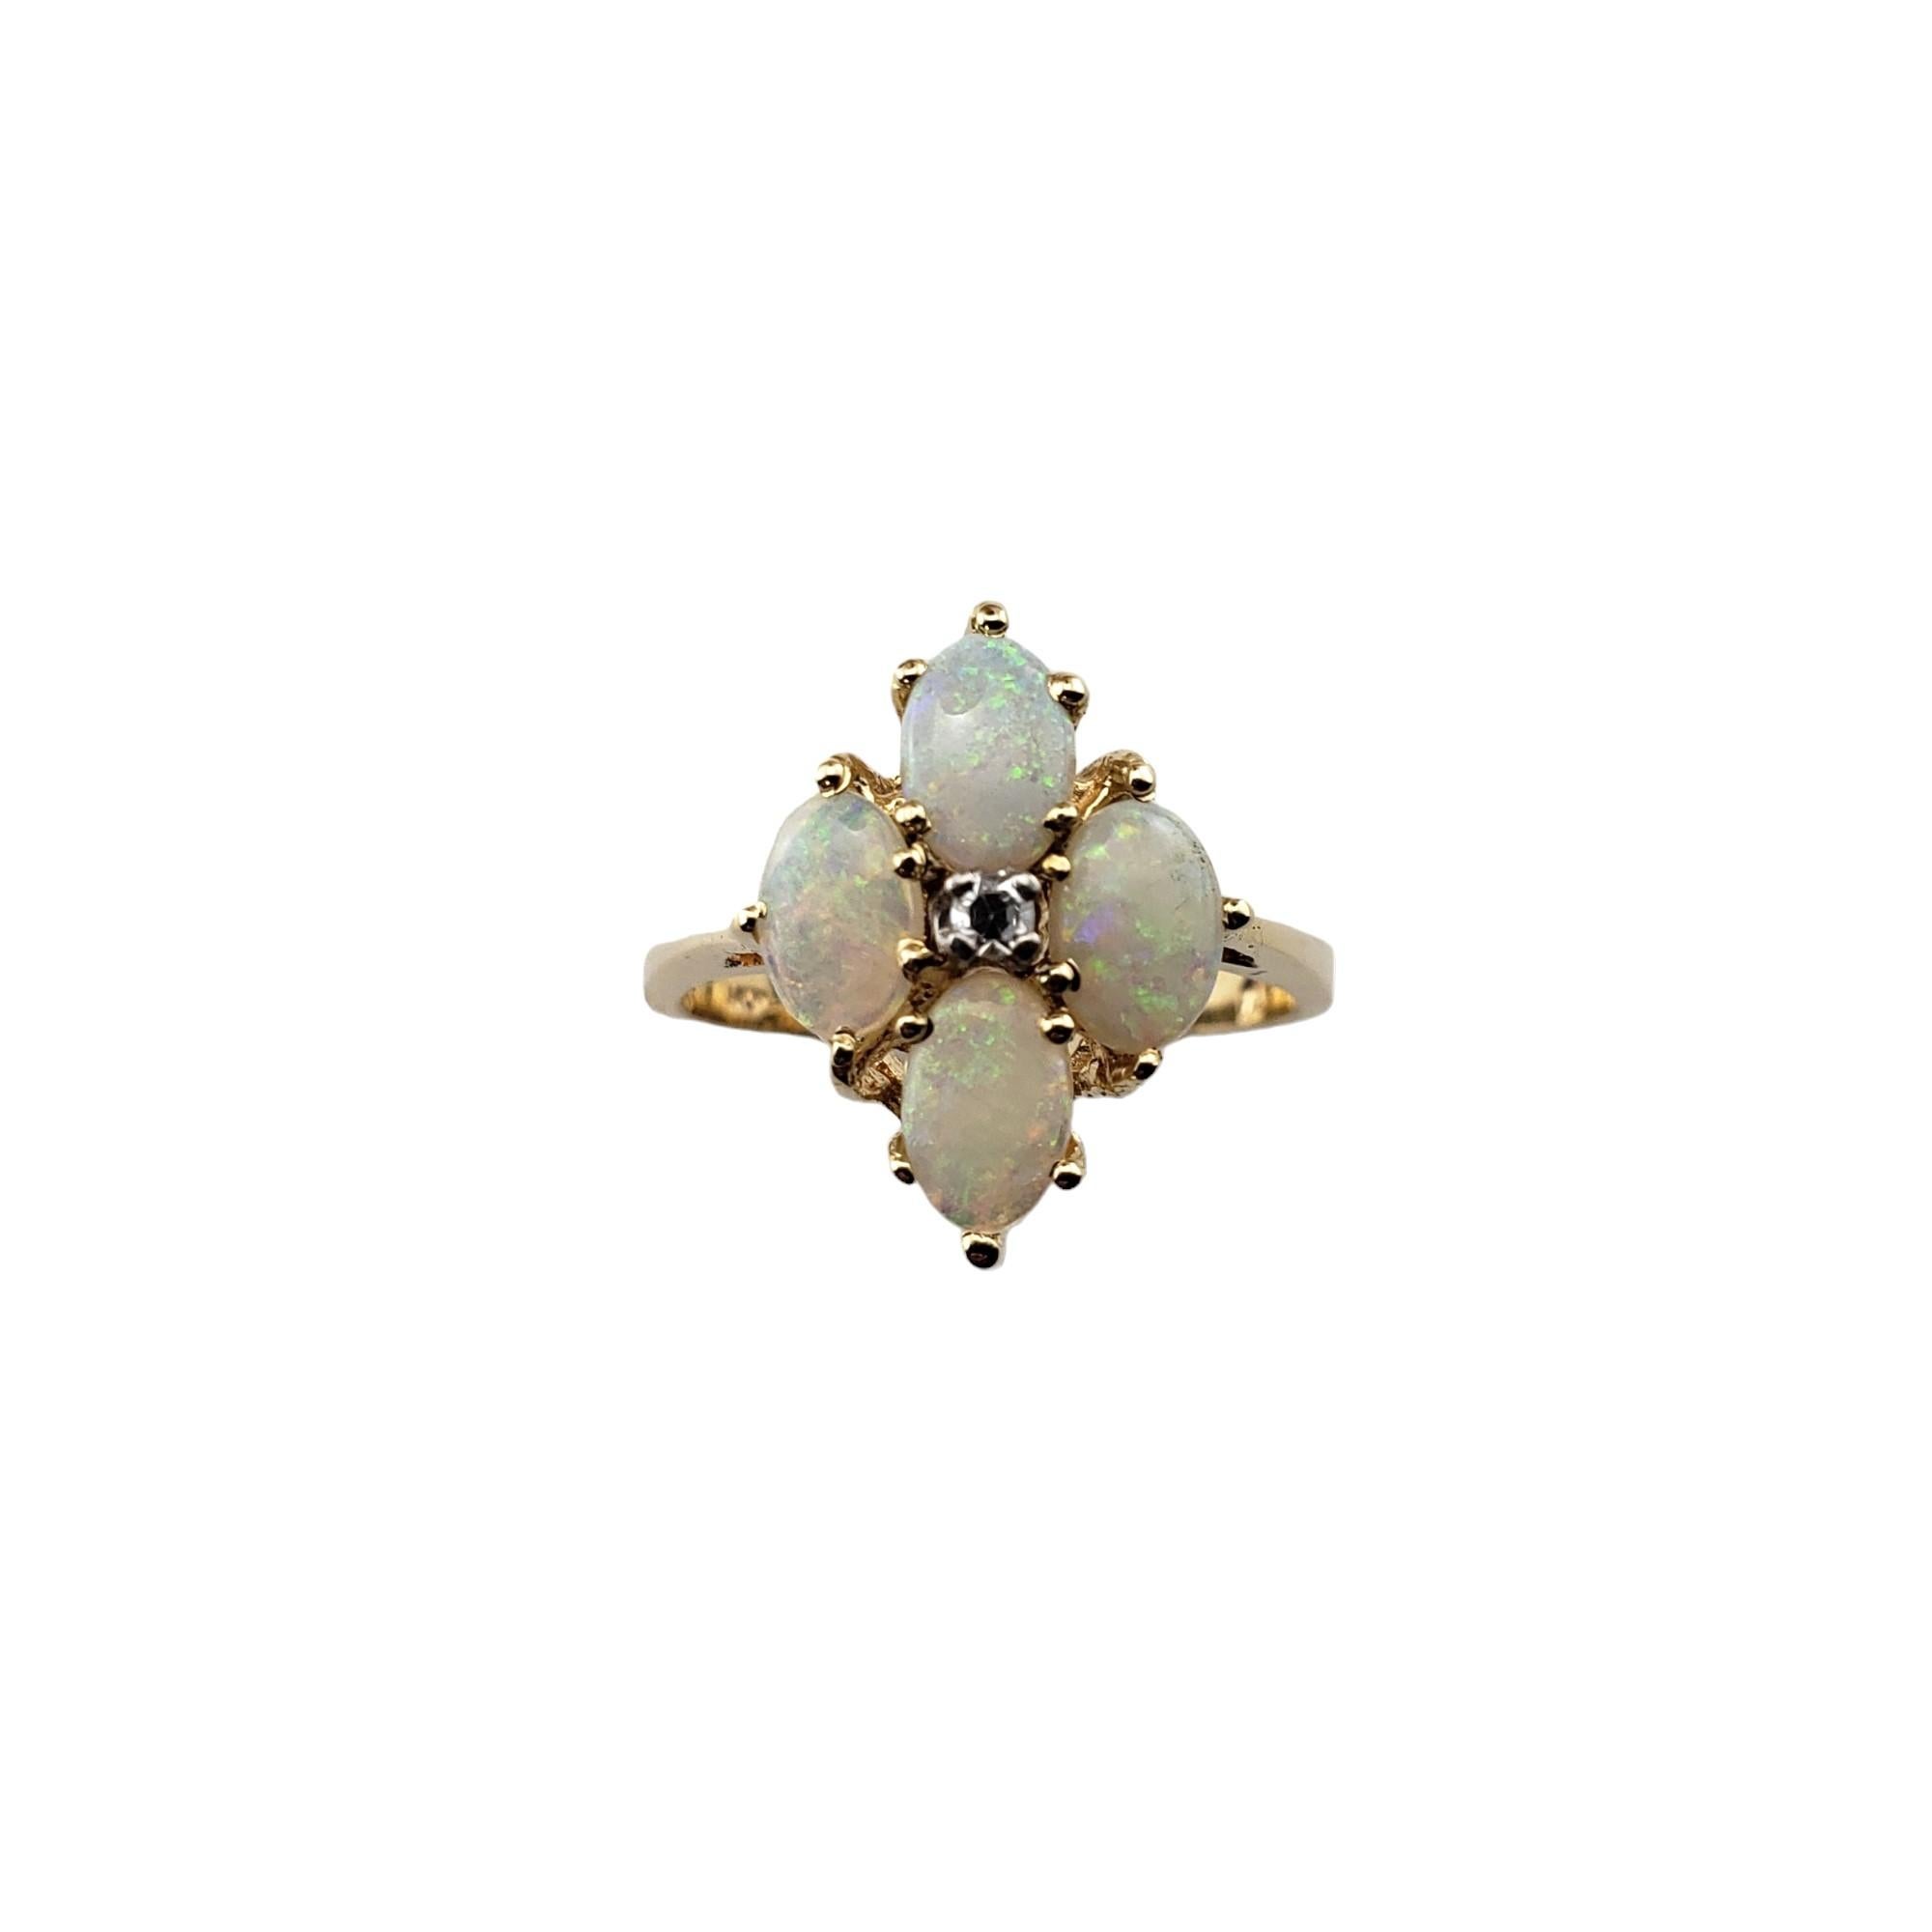 Vintage 14 Karat Yellow Gold Opal and Diamond Ring Size 6.75-

This elegant ring features four oval opals (7 mm x 5 mm) and one round single cut diamond set in classic 14K yellow gold.  
Width: 15.8 mm.  Shank: 2 mm.

Approximate total diamond